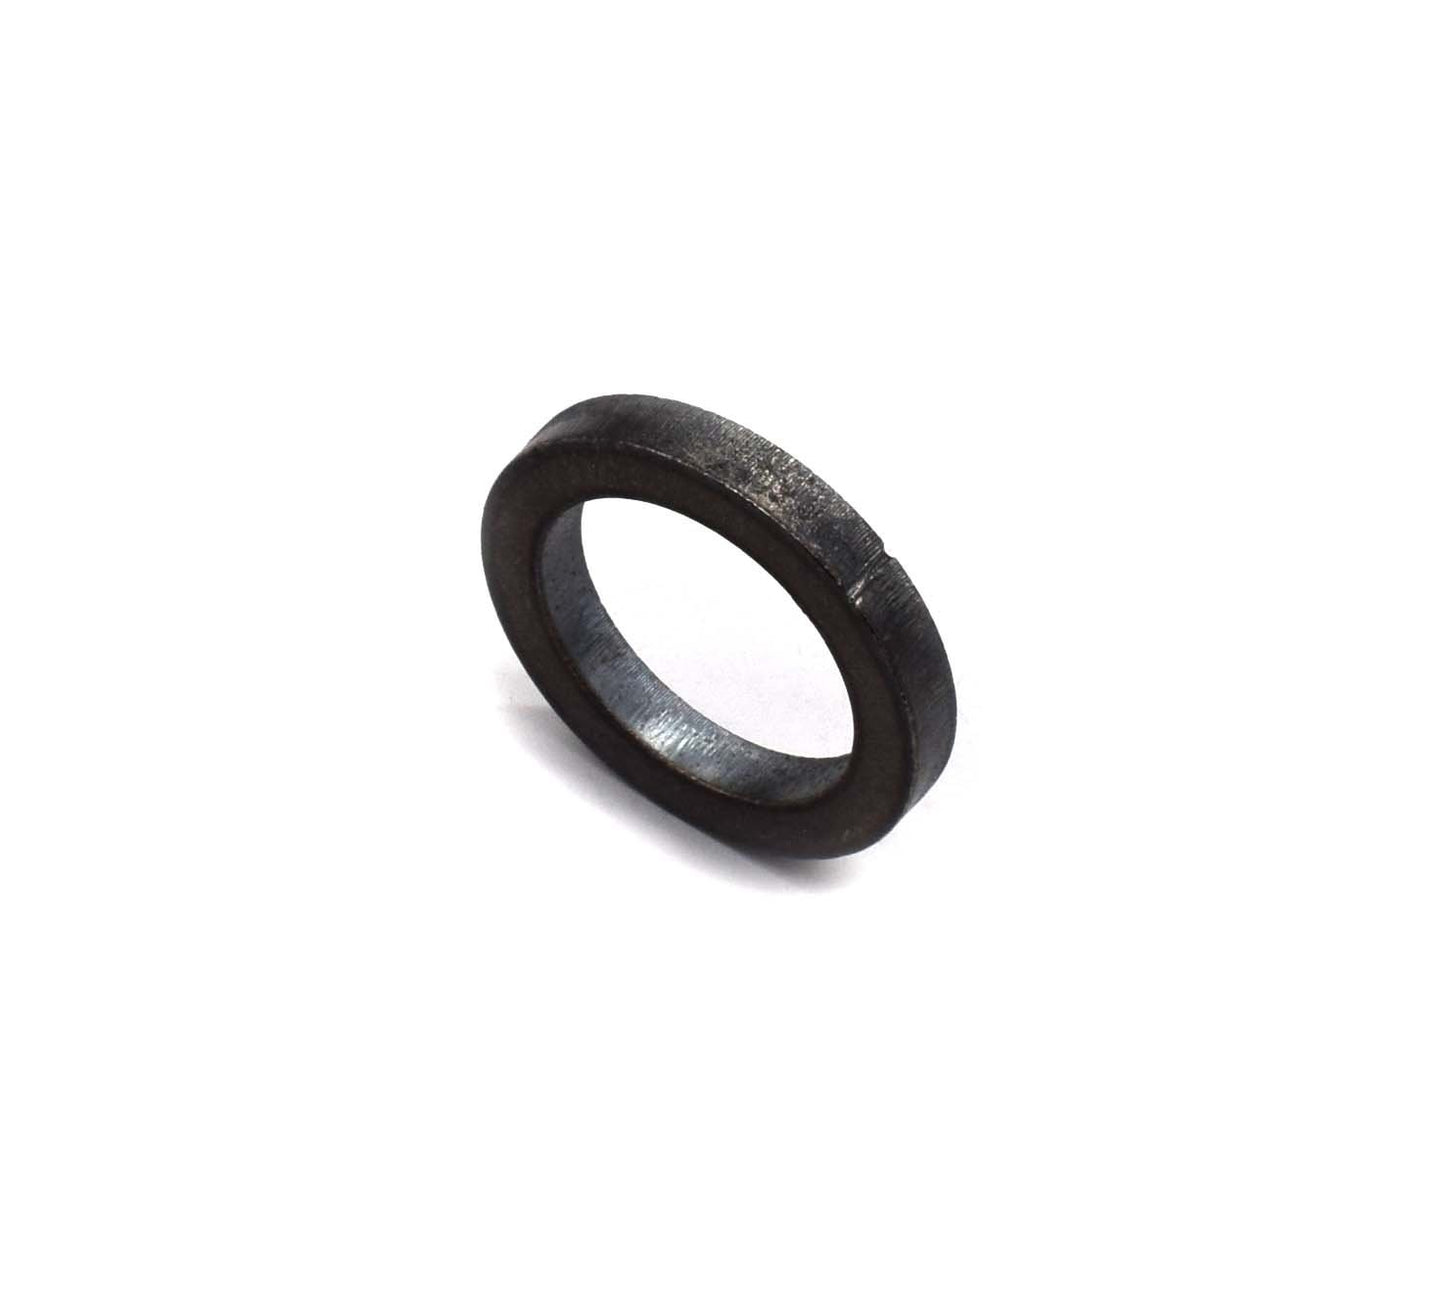 Shackle Bushing Shim, Front, 1970-1973, Jeepster Commando and Commando - The JeepsterMan